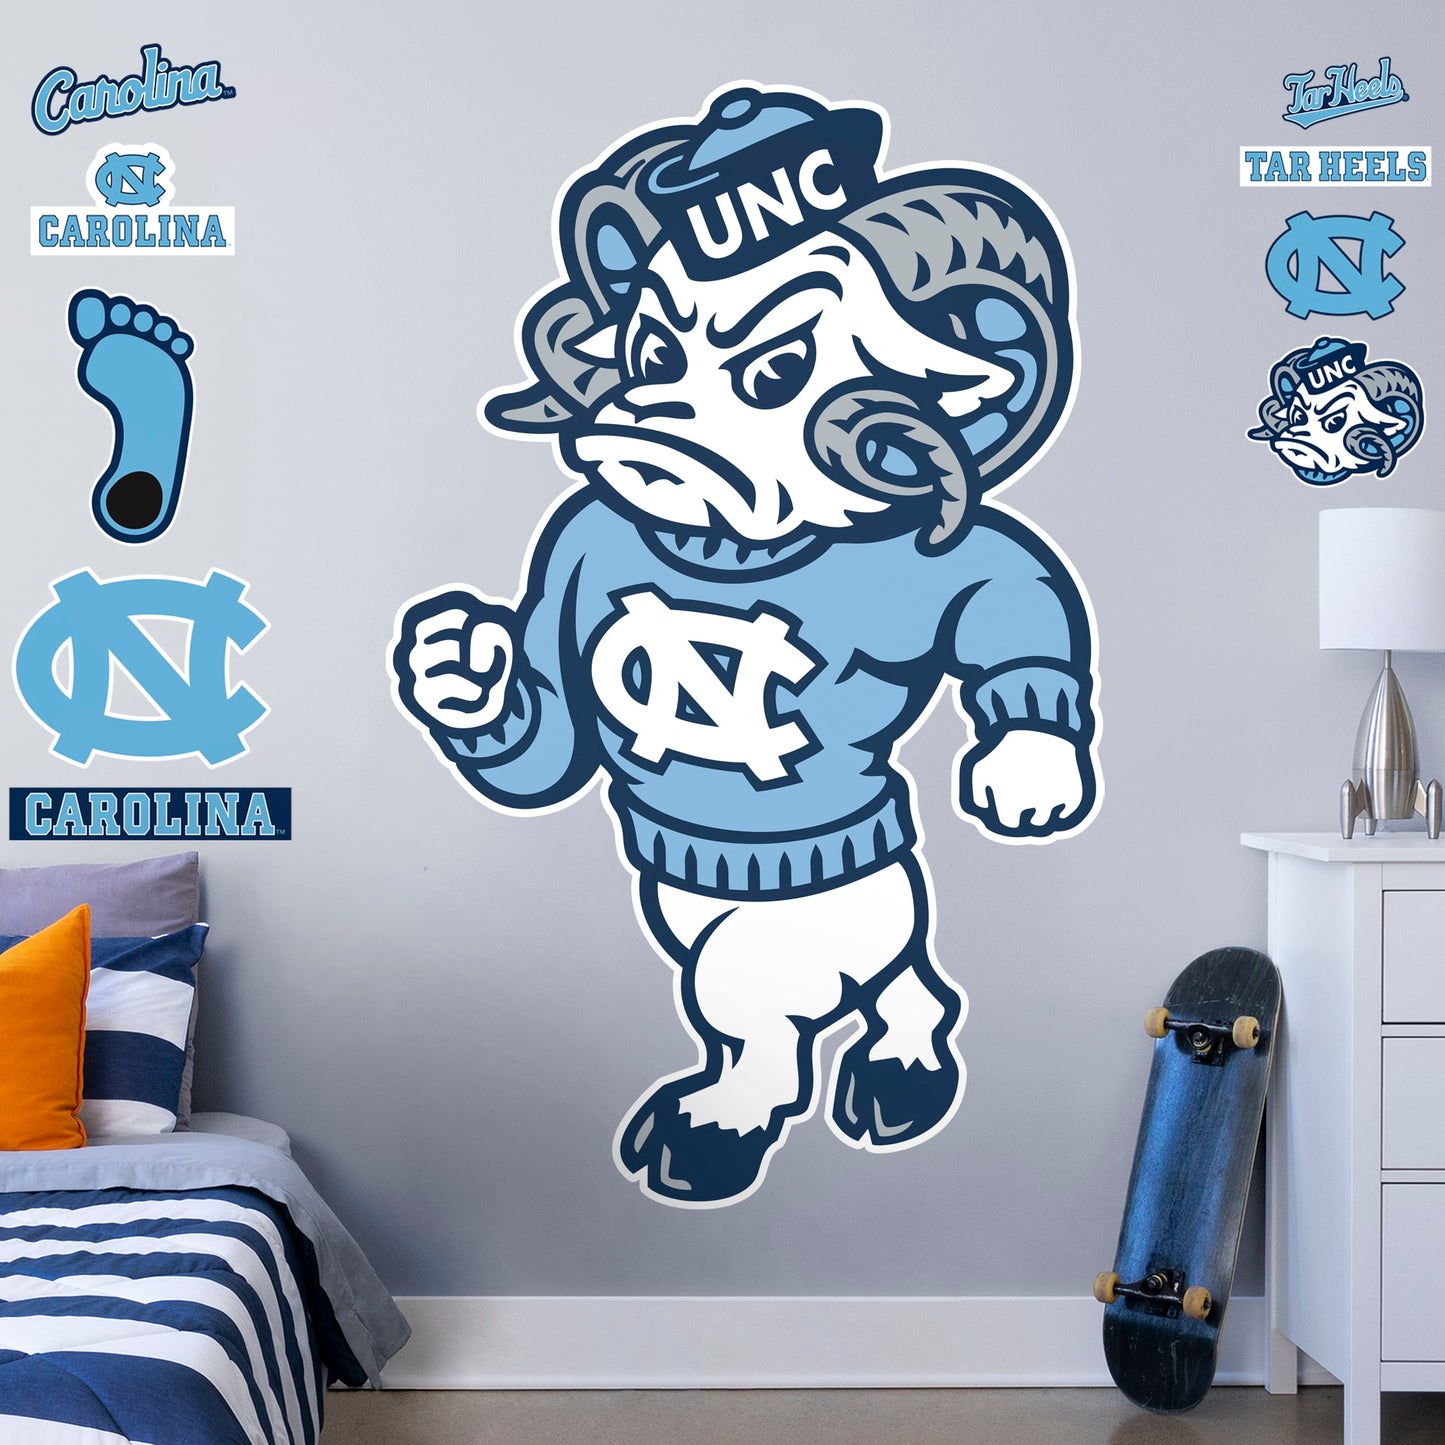 Life-Size Mascot + 11 Decals (45"W x 71"H)